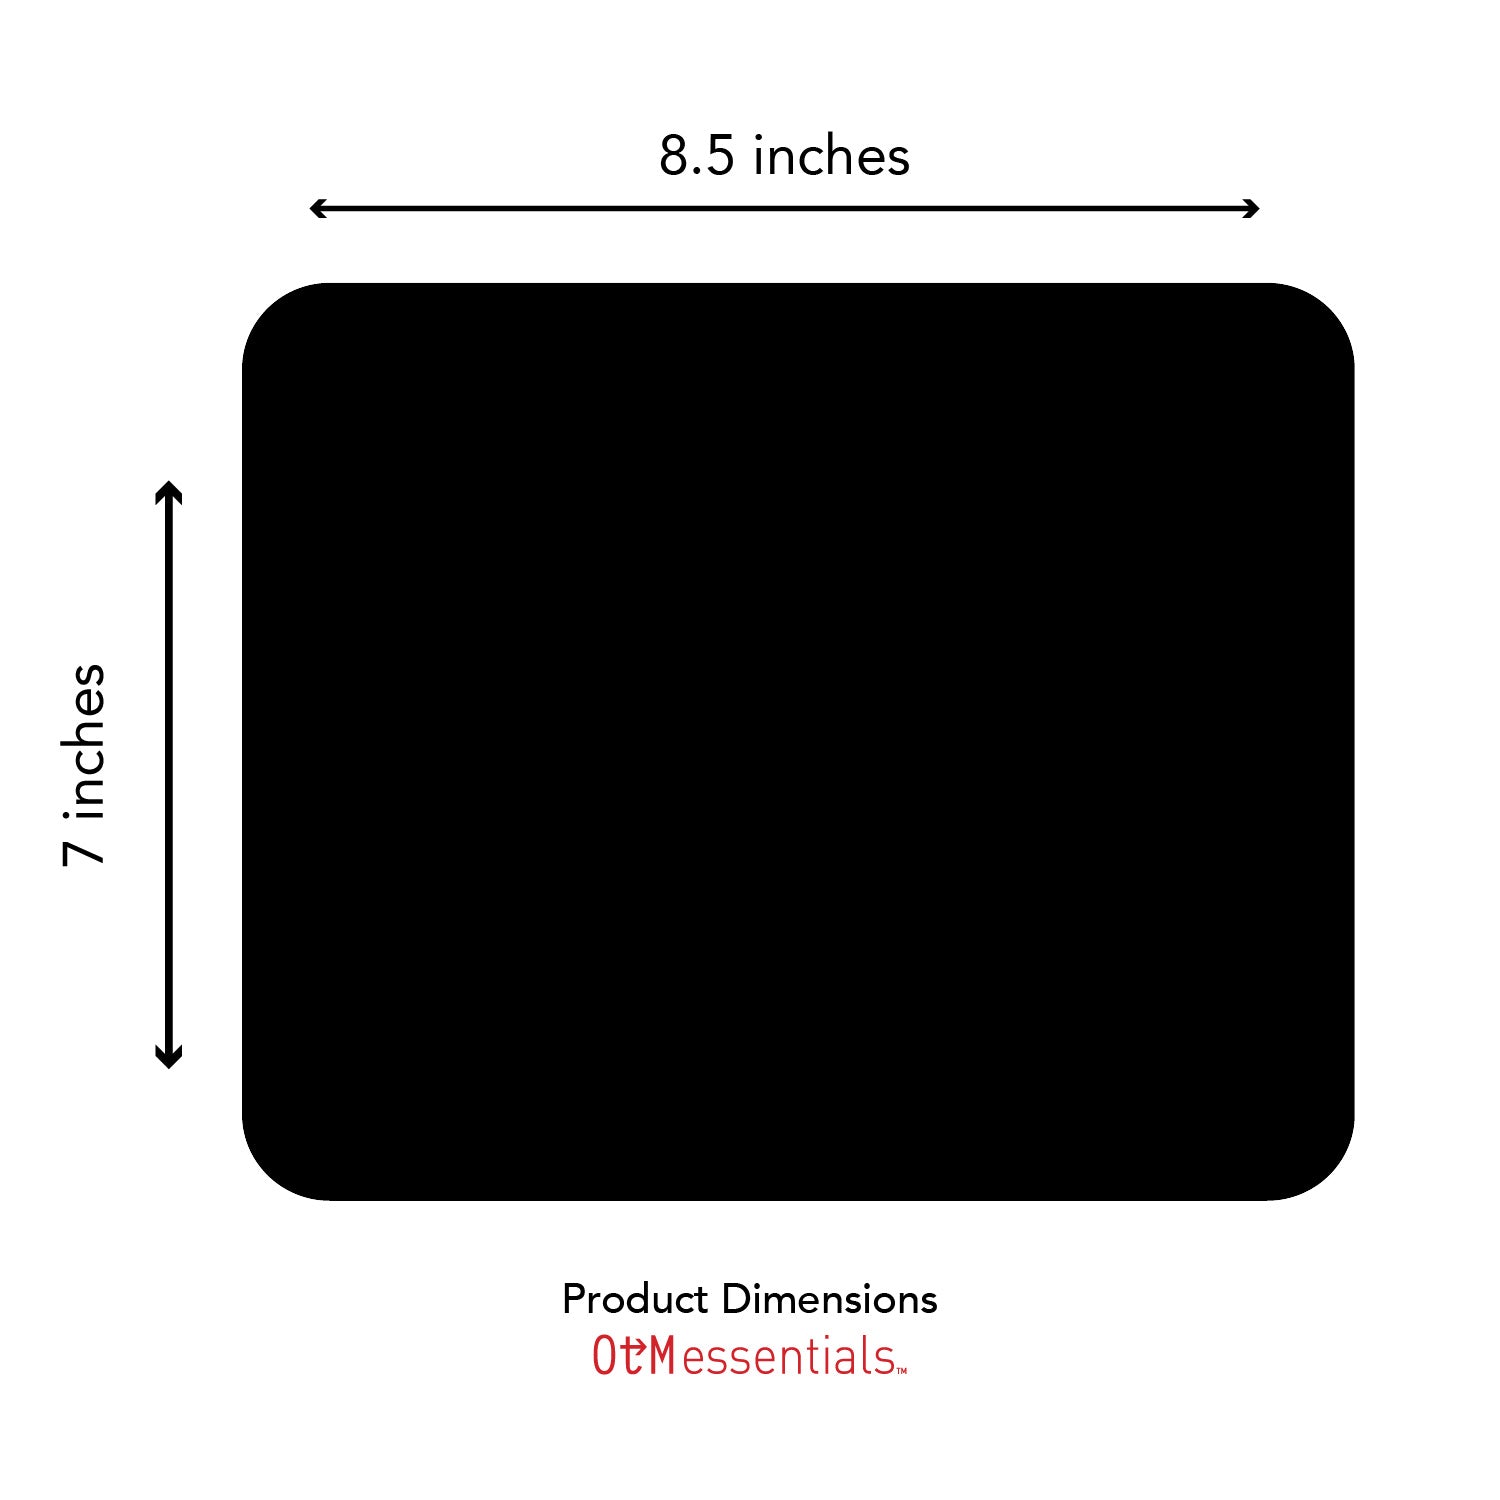 OC-MST2-MH00A, Product Dimensions